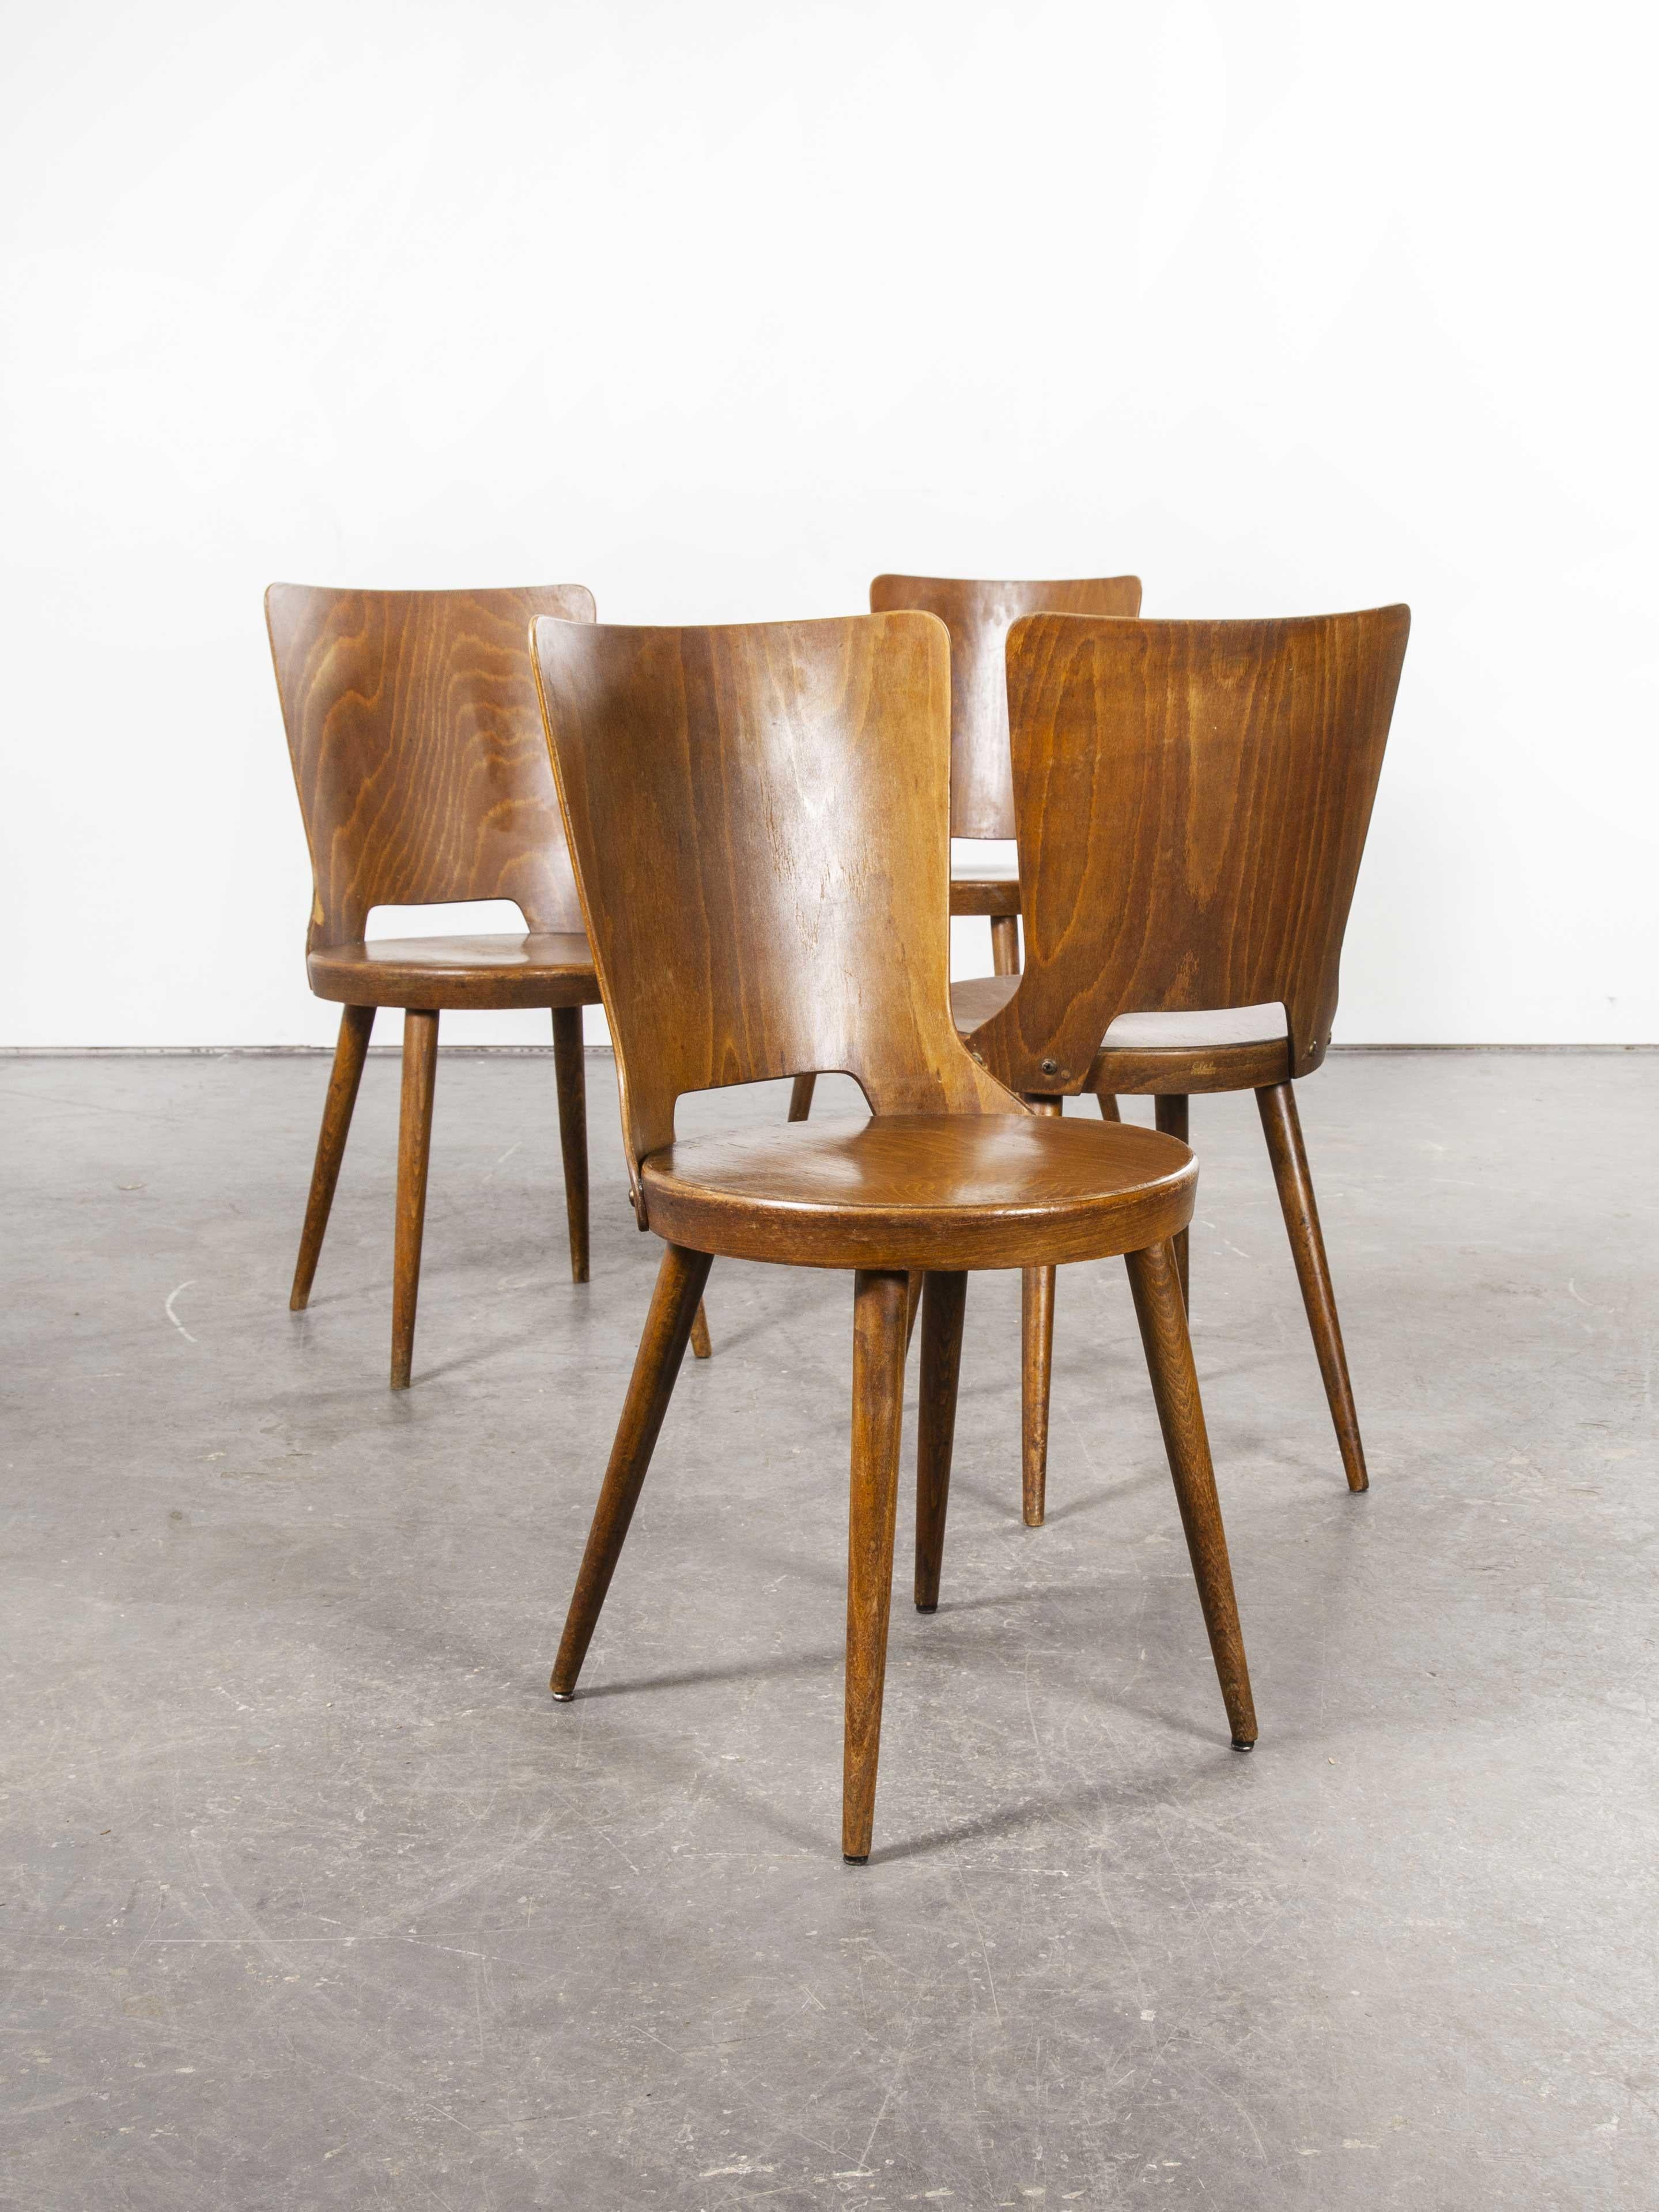 1960s French Baumann bentwood dove dining chair, set of four

1960s French Baumann bentwood dove dining chair, set of four. The dove chairs is one of Baumann’s most beautiful designs. Baumann is a slightly off the radar French producer just